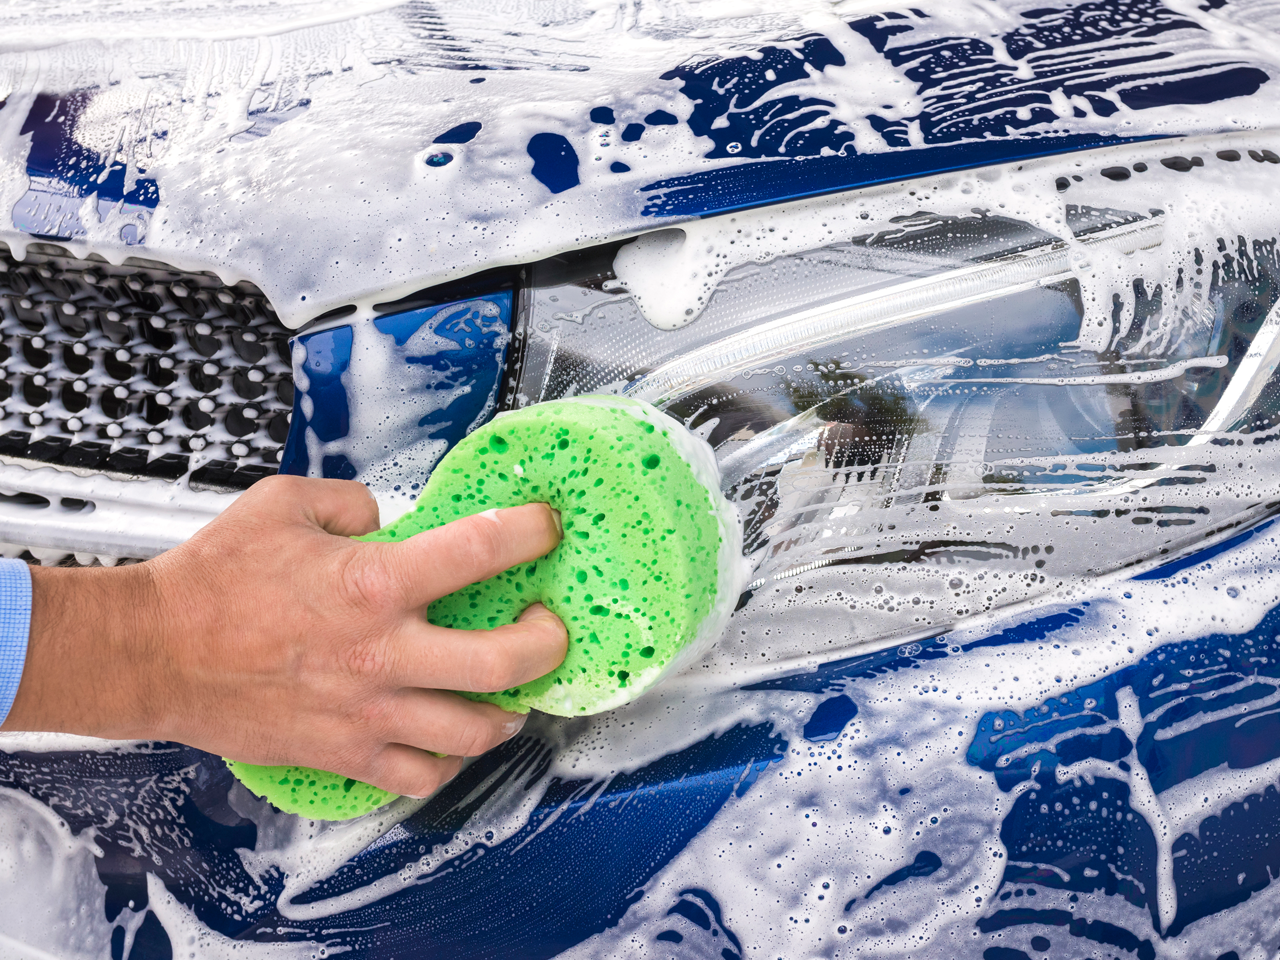 The Best Car Wash Soaps by Type 2020 - TrueCar Blog